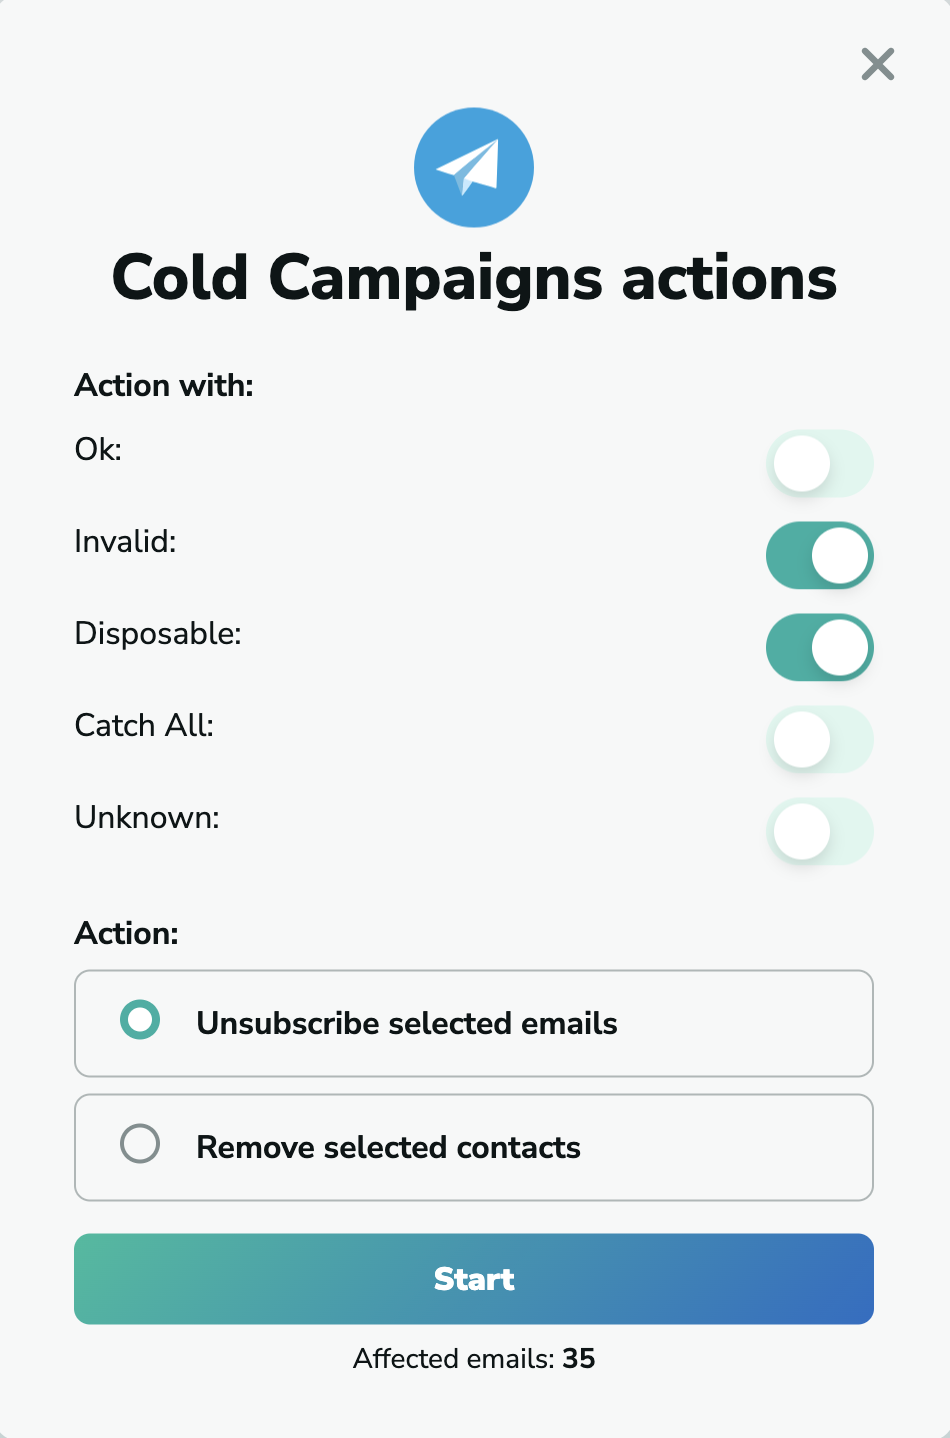 Cold Campaigns unsubscribe emails in MillionVerifier